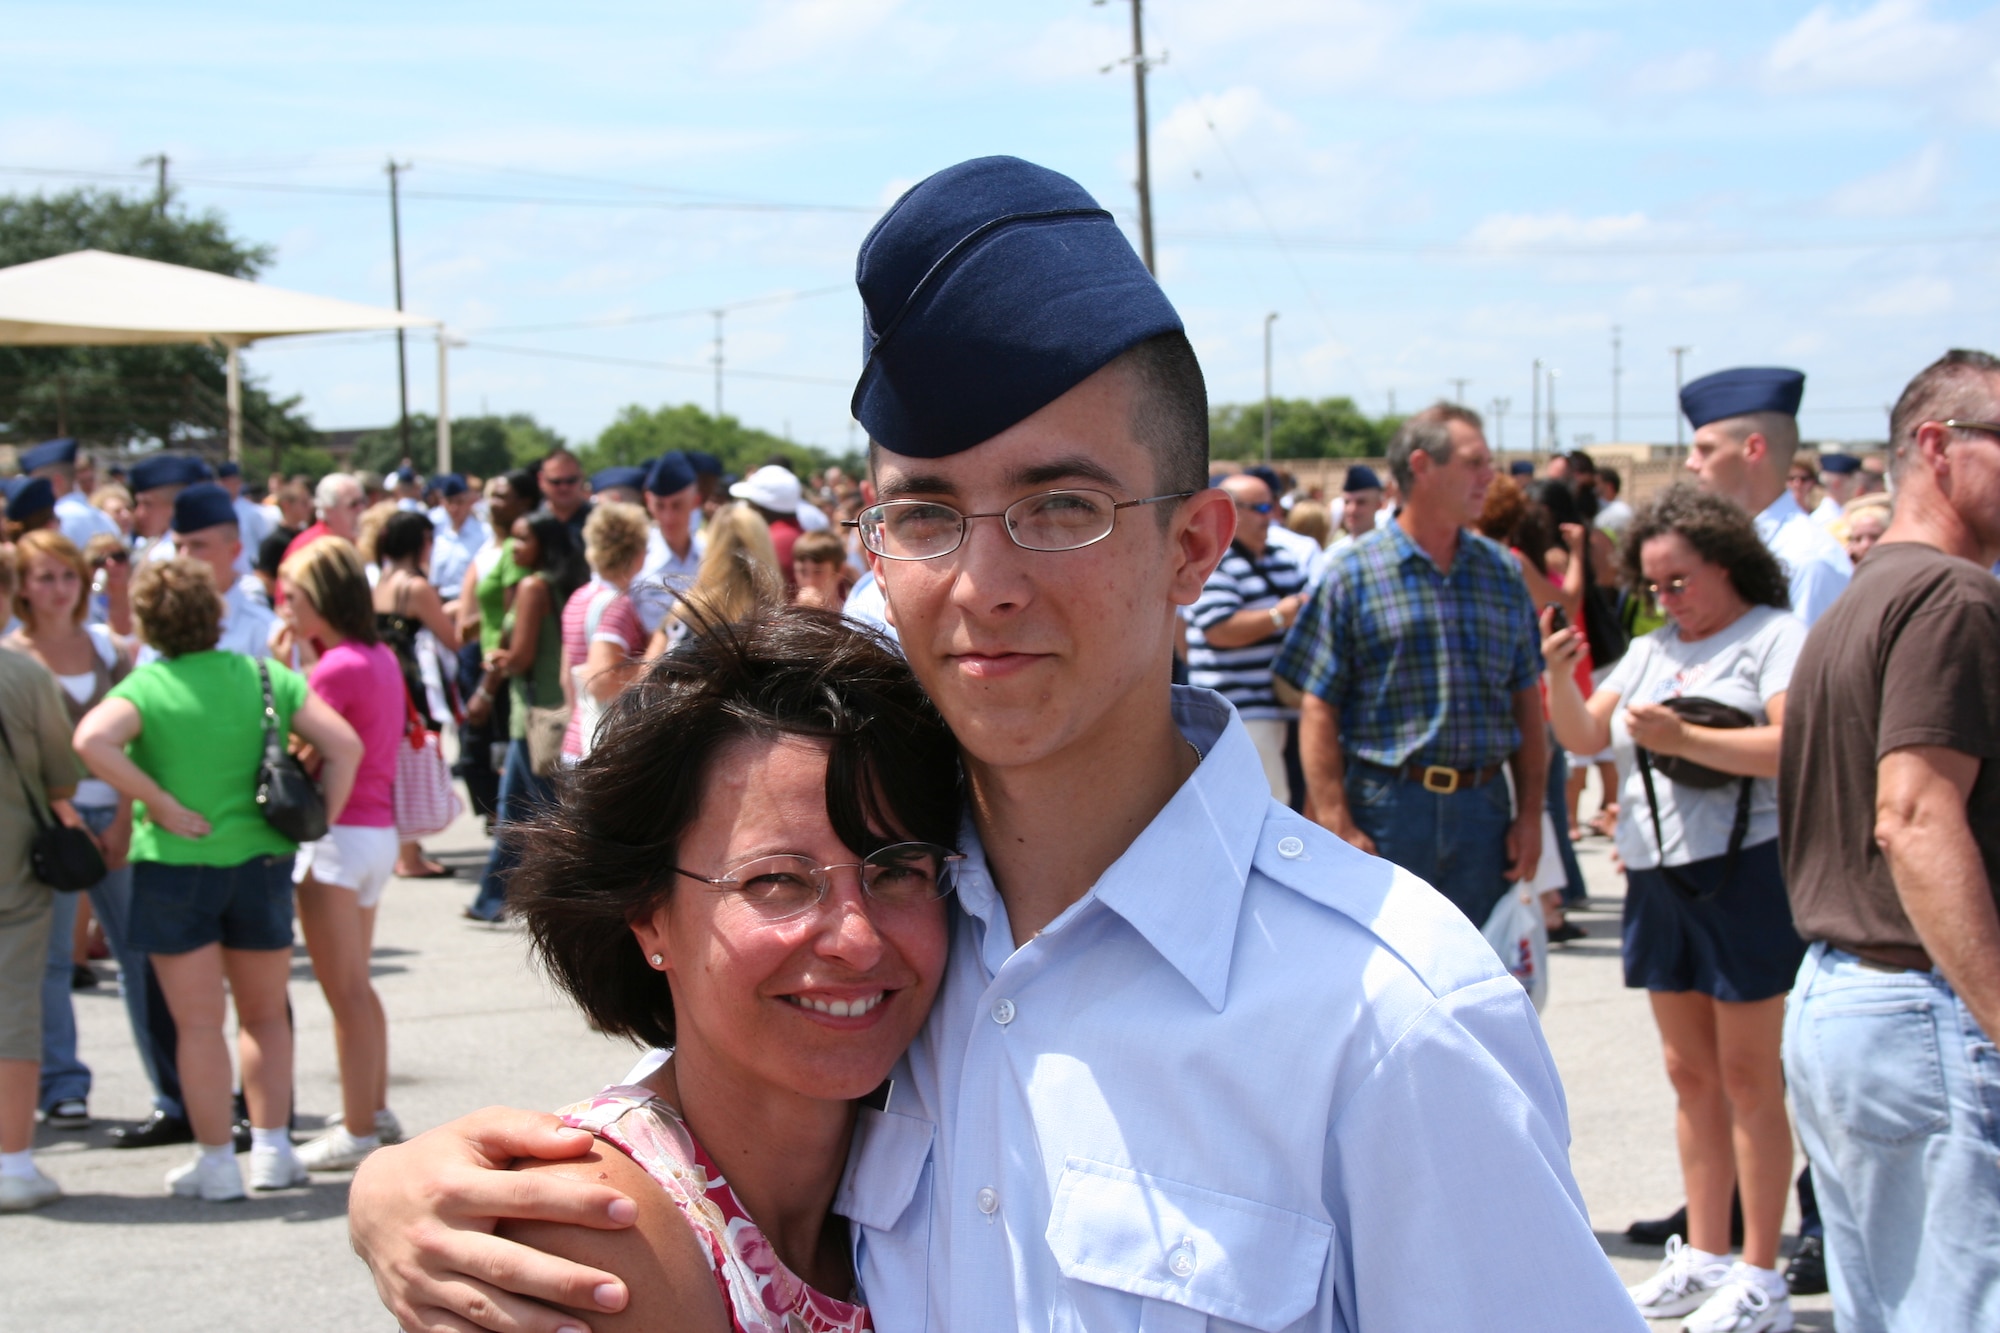 Chase’s mother, Major Lisa Lehocky (left), a member of 301st Medical Squadron, will miss her son while at the academy, but believes he will become a great officer. (Courtesy Photo)